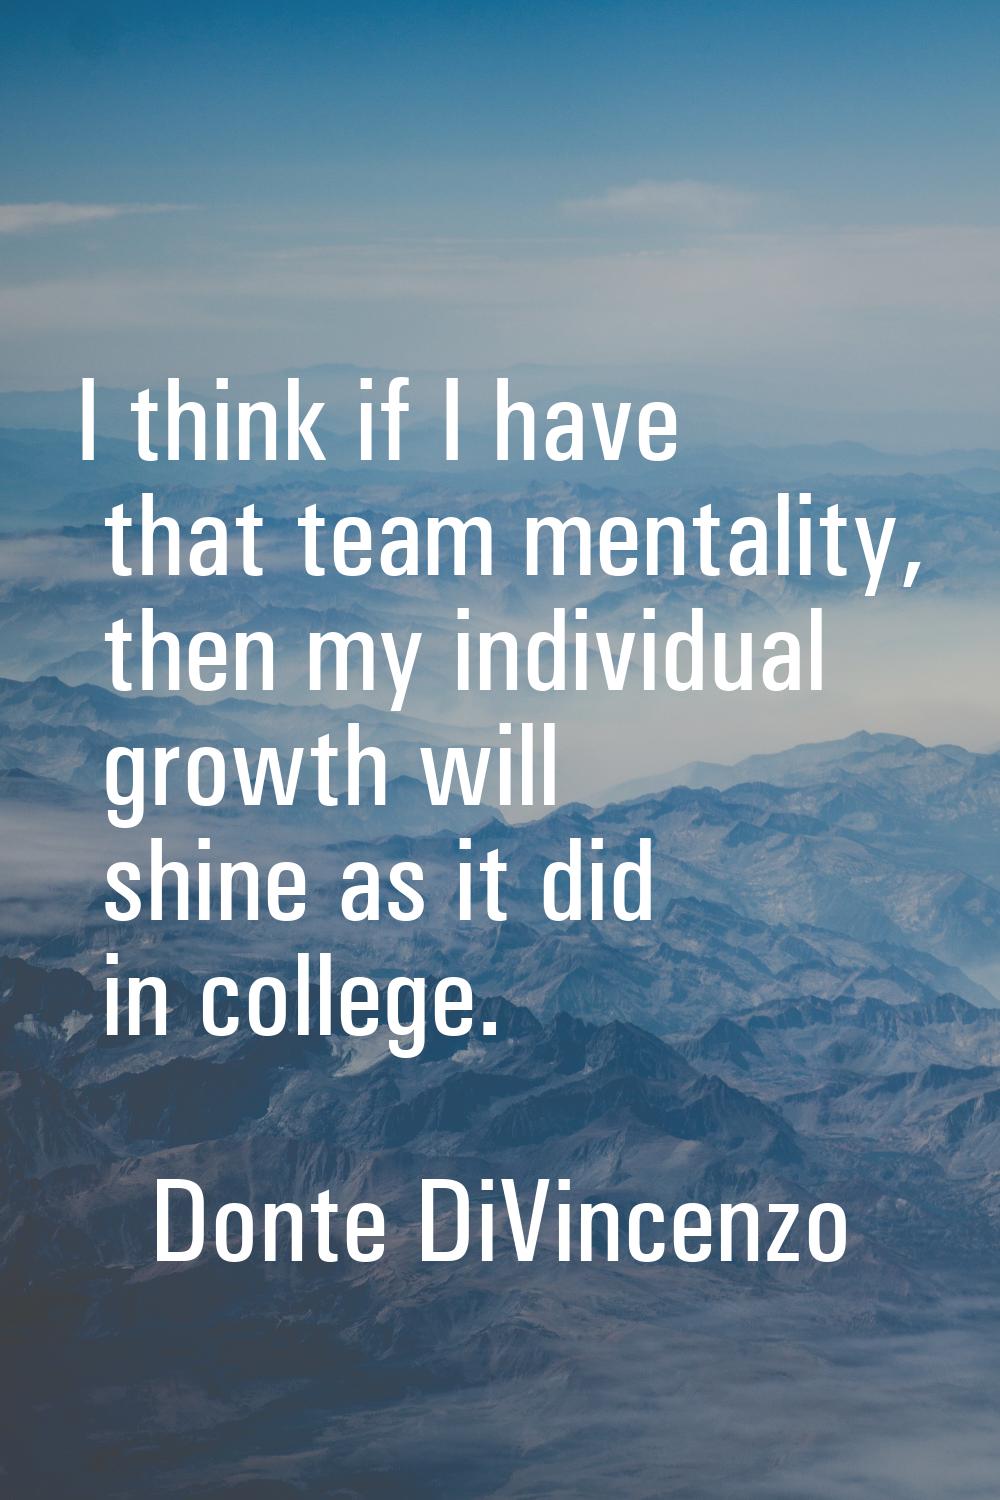 I think if I have that team mentality, then my individual growth will shine as it did in college.